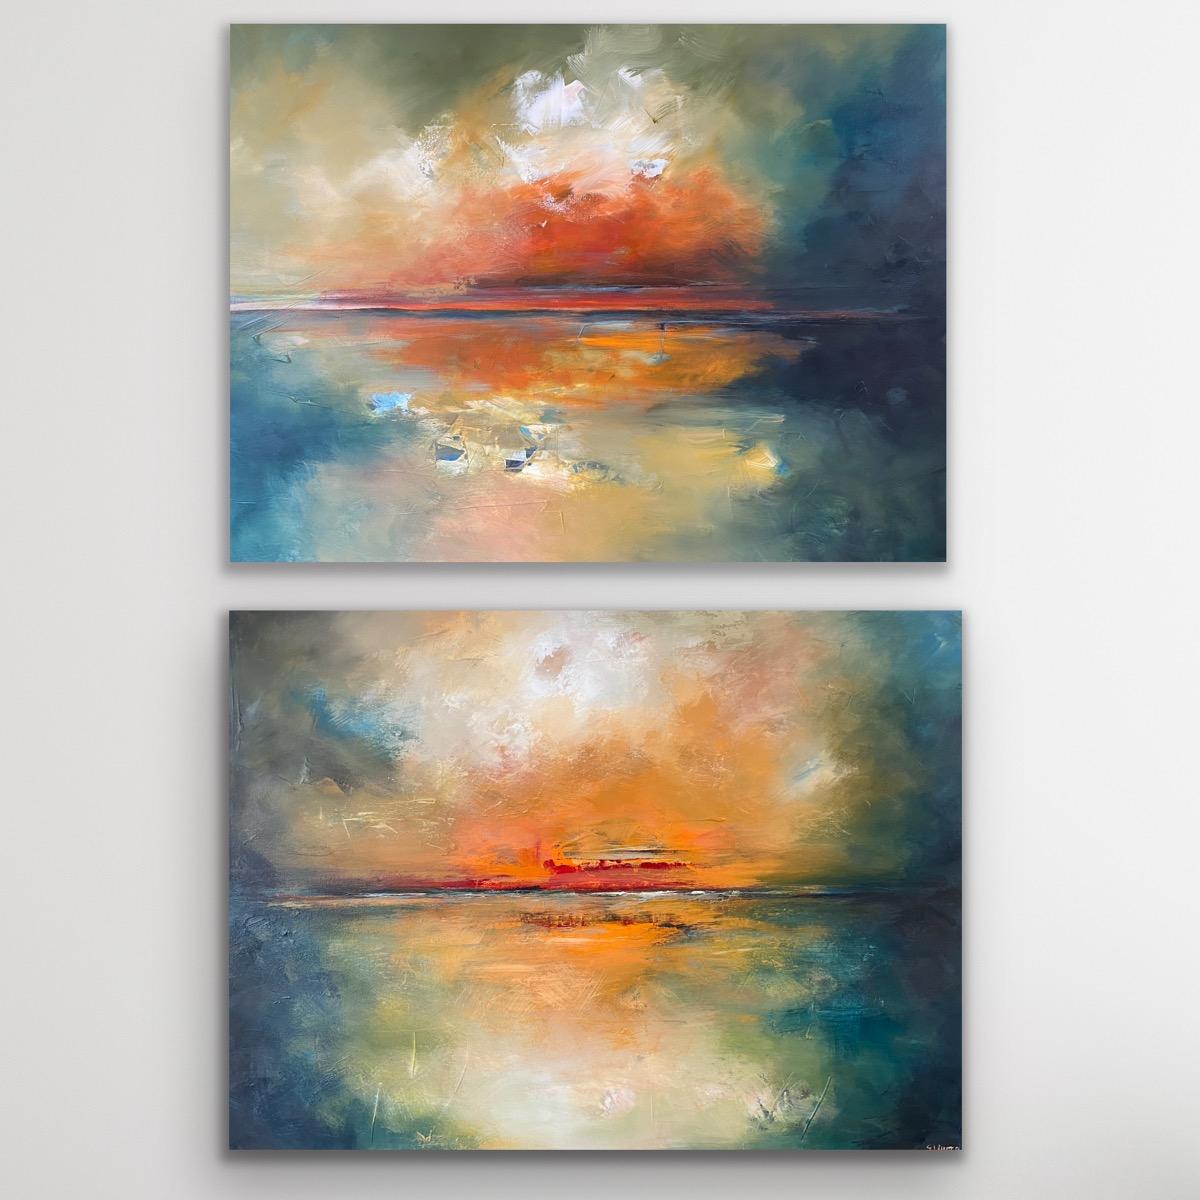  Susanne Winter  Abstract Painting - Diptych of Sea Of Elusion and Orange Evening, Original panting, Landscape, Sea